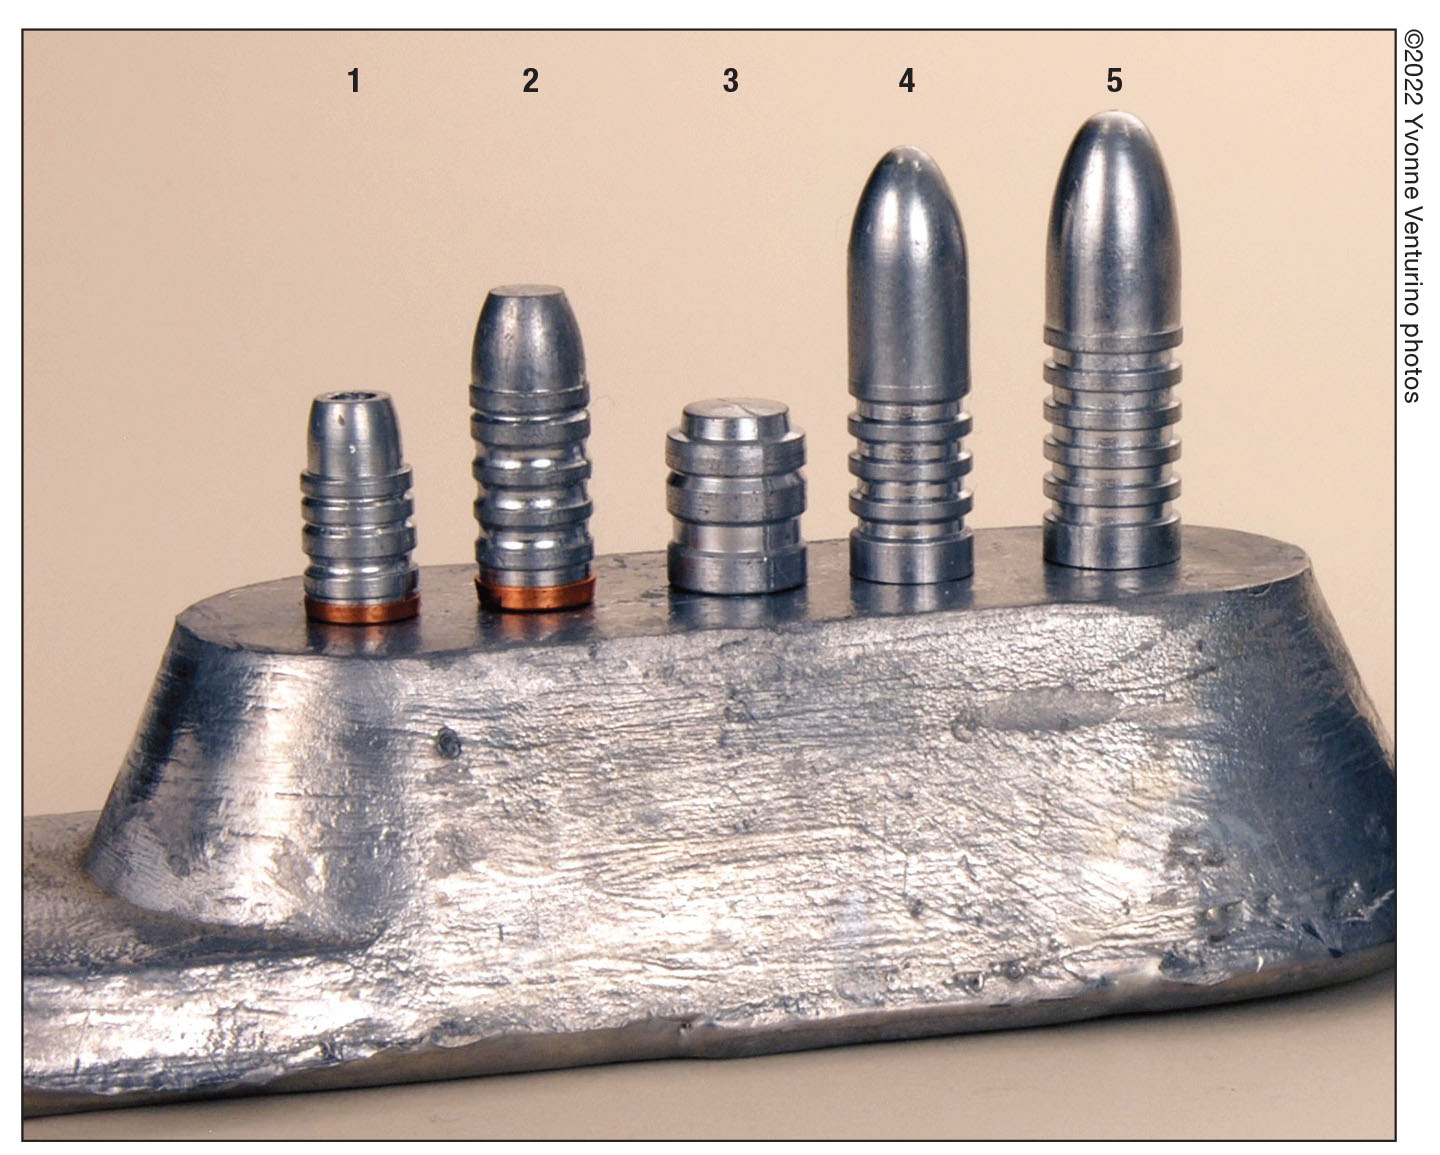 For bullets from 1,000 fps to 1,500 fps, Mike prefers a gas-check design when using 1:20 (tin to lead) alloy: (1) Lyman No. 357156HP, (2) RCBS No. 38-255-FN for .38/.357 revolvers and .38-55 rifles. The middle  wadcutter bullet (3) is a Redding/SAECO No. 453 for .45 revolvers. Bullets (4) .40- and (5) .45-caliber are Creedmoor-style from a Steve Brooks custom BPCR mould.